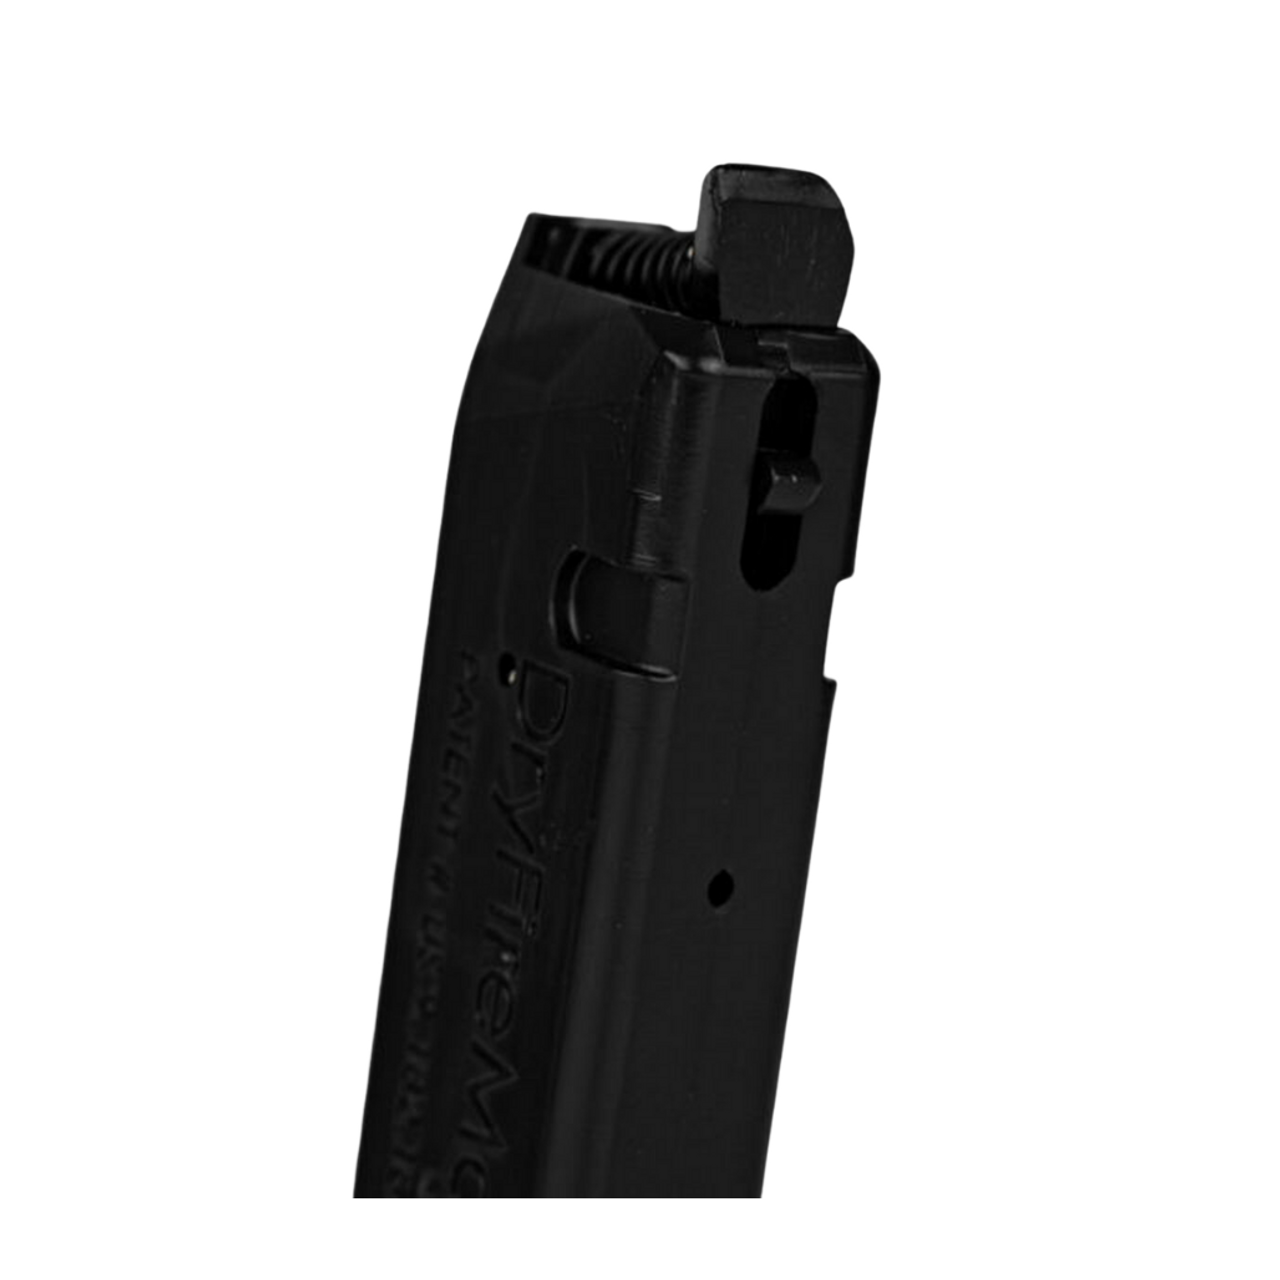 Dry Fire Magazine for Double Stack Glock | Firearms Training